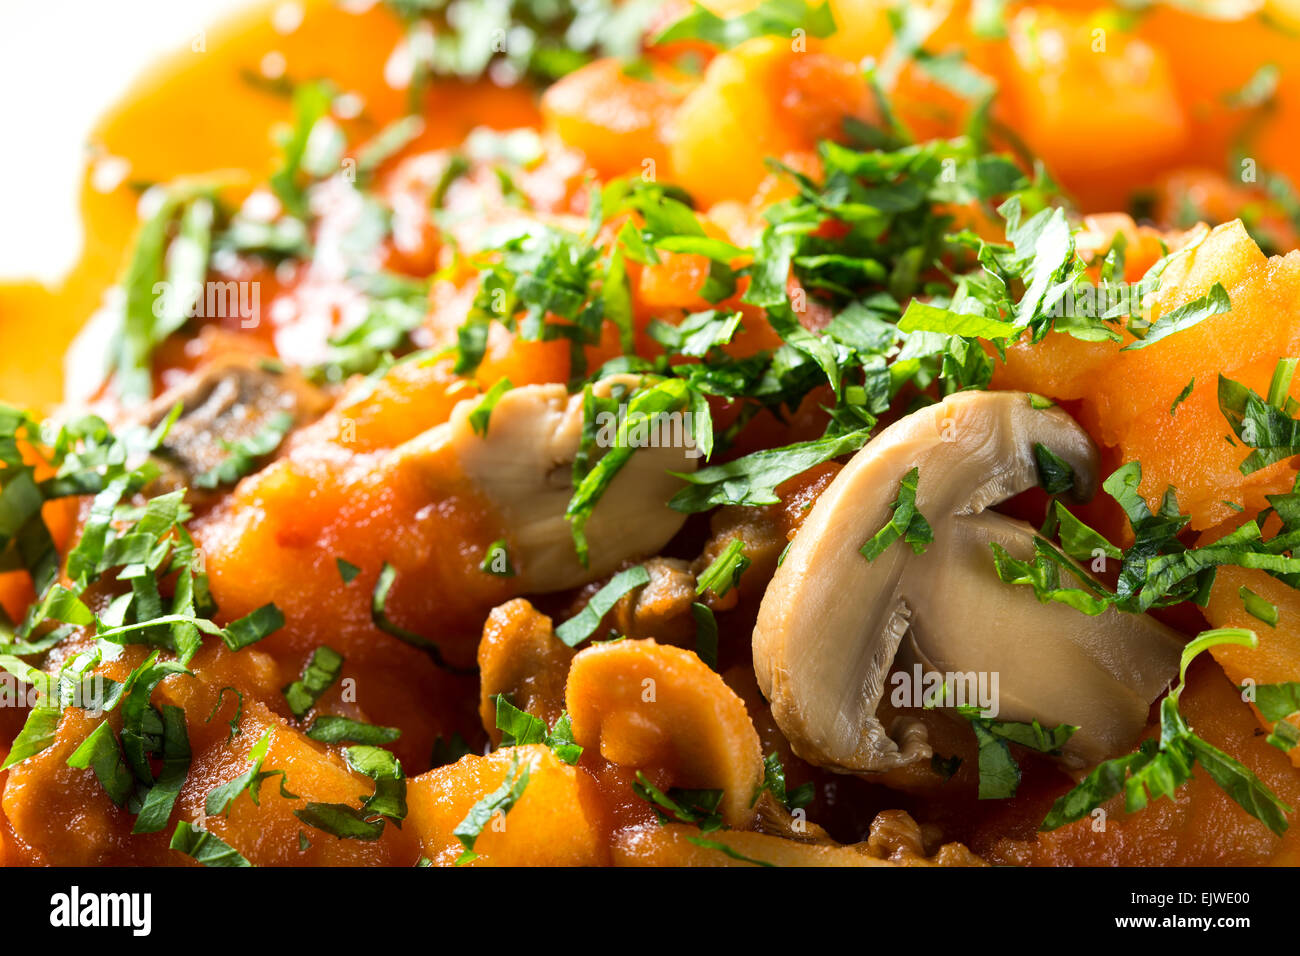 Potatoes with mushrooms - close-up view Stock Photo